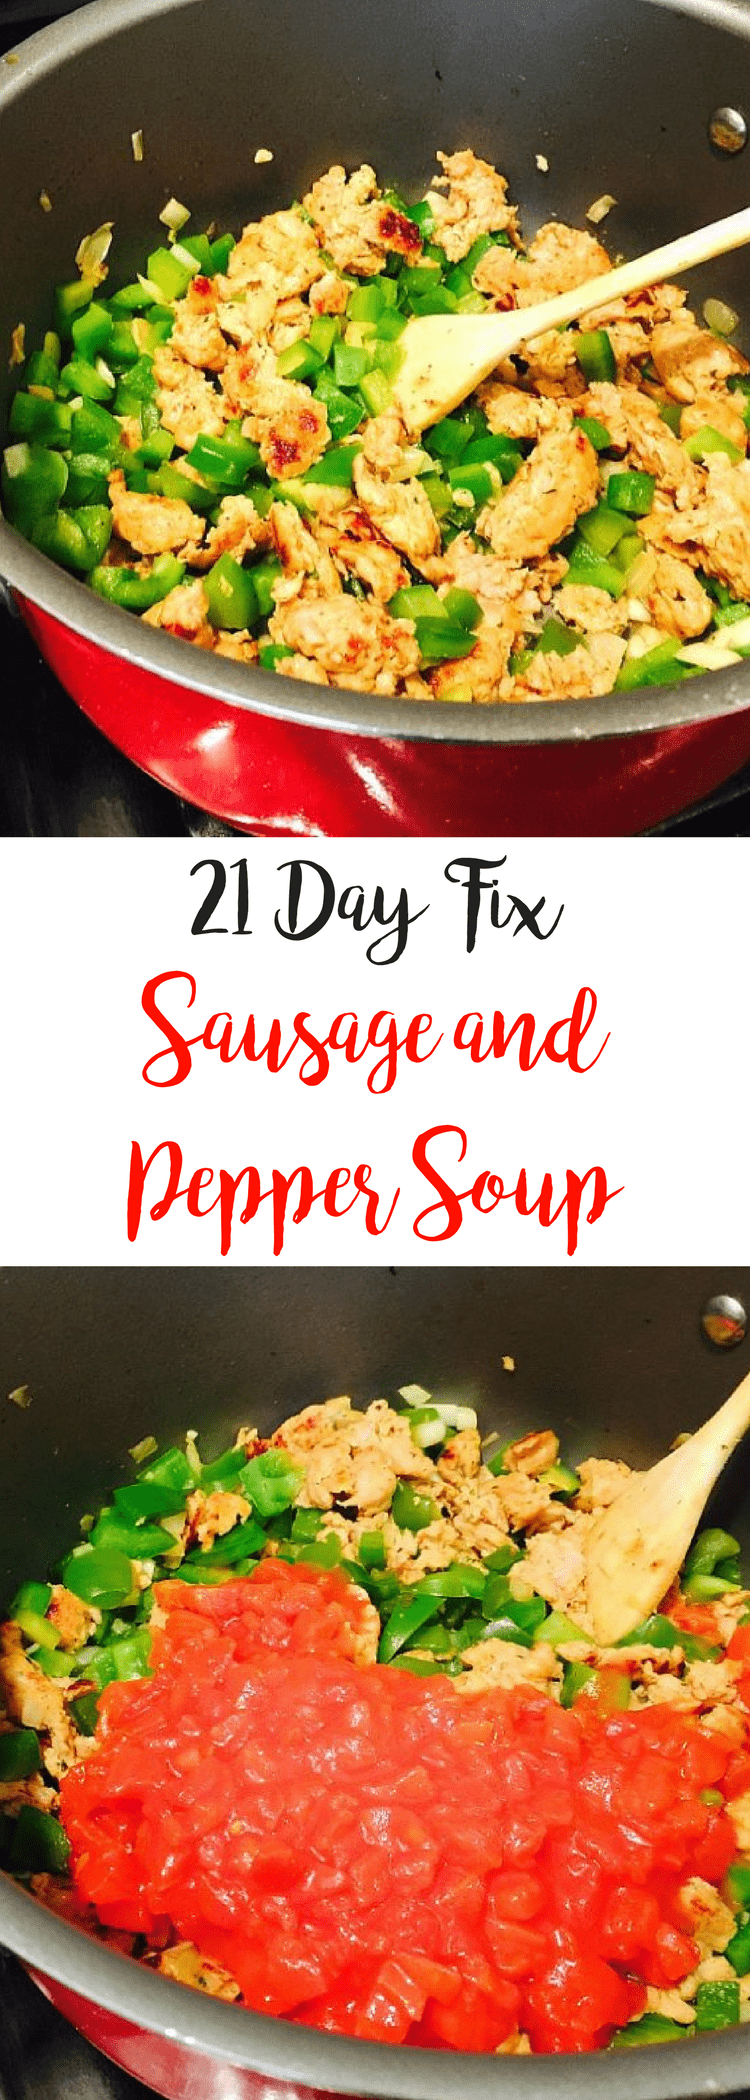 21 Day Fix Sausage and Pepper Soup | Confessions of a Fit Foodie